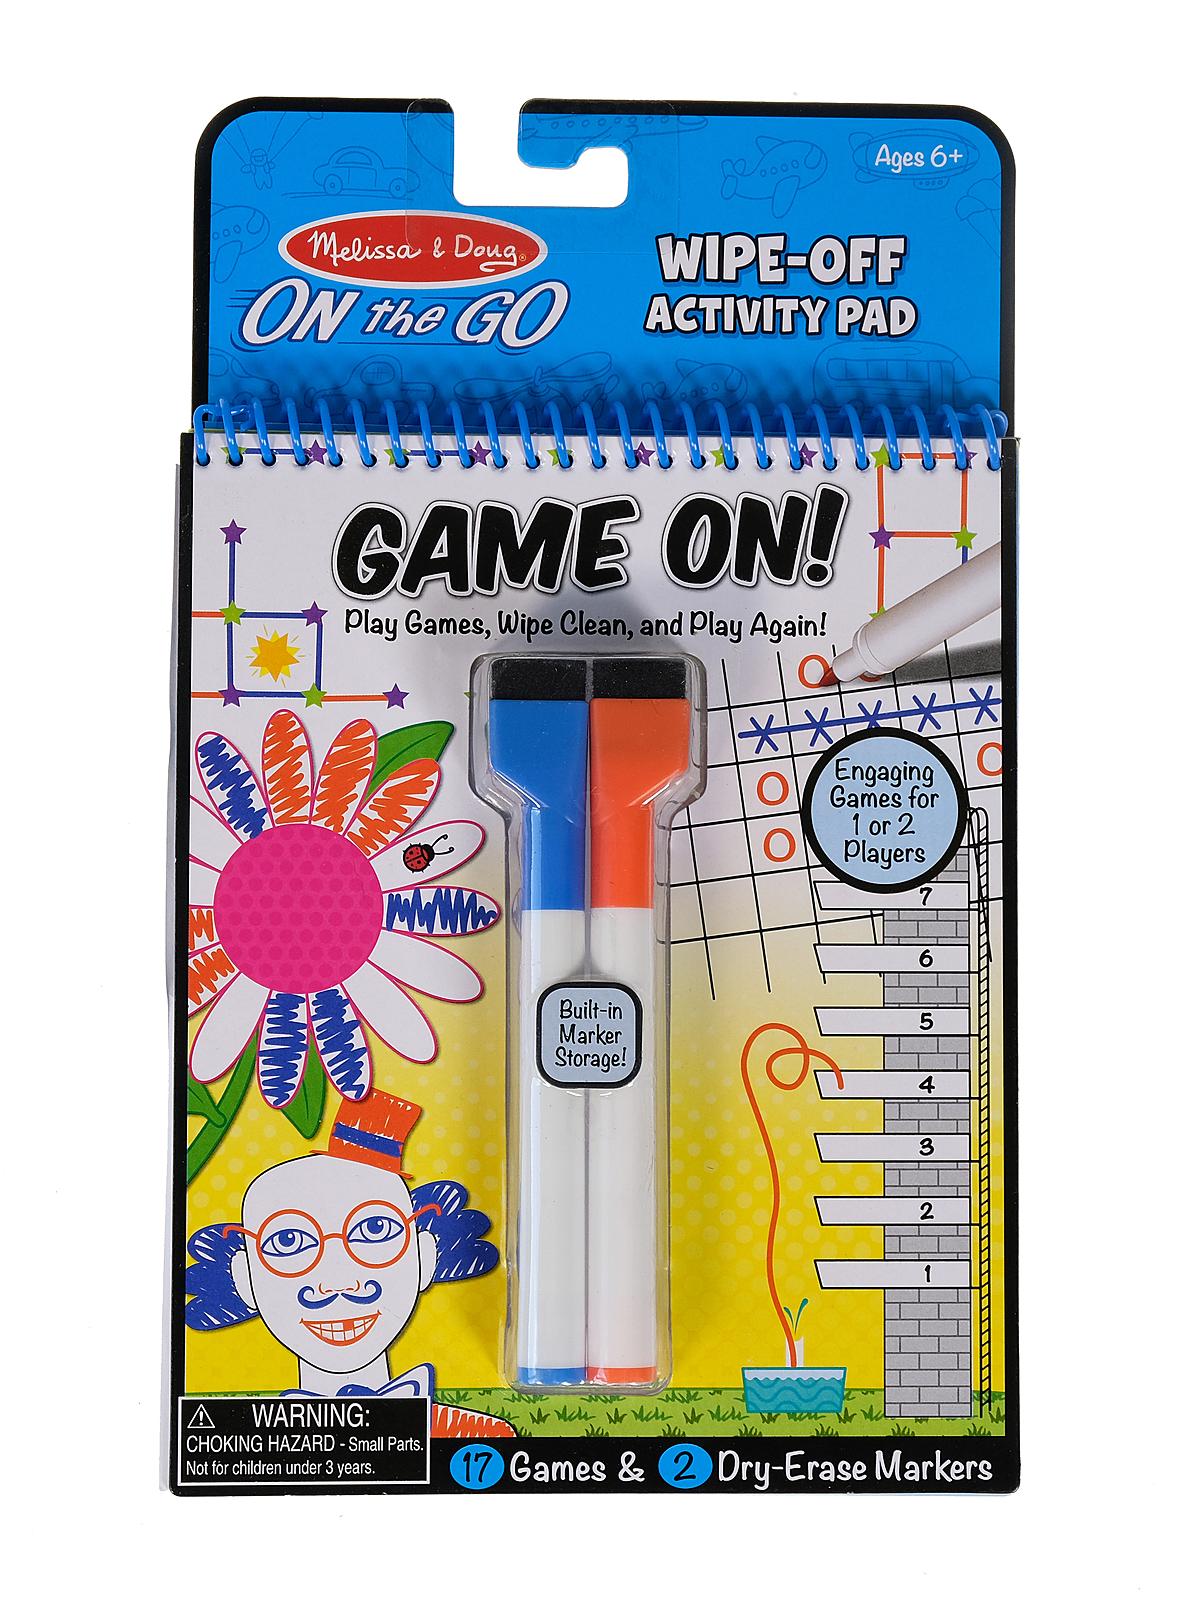 On The Go Wipe-off Activity Pad Game On